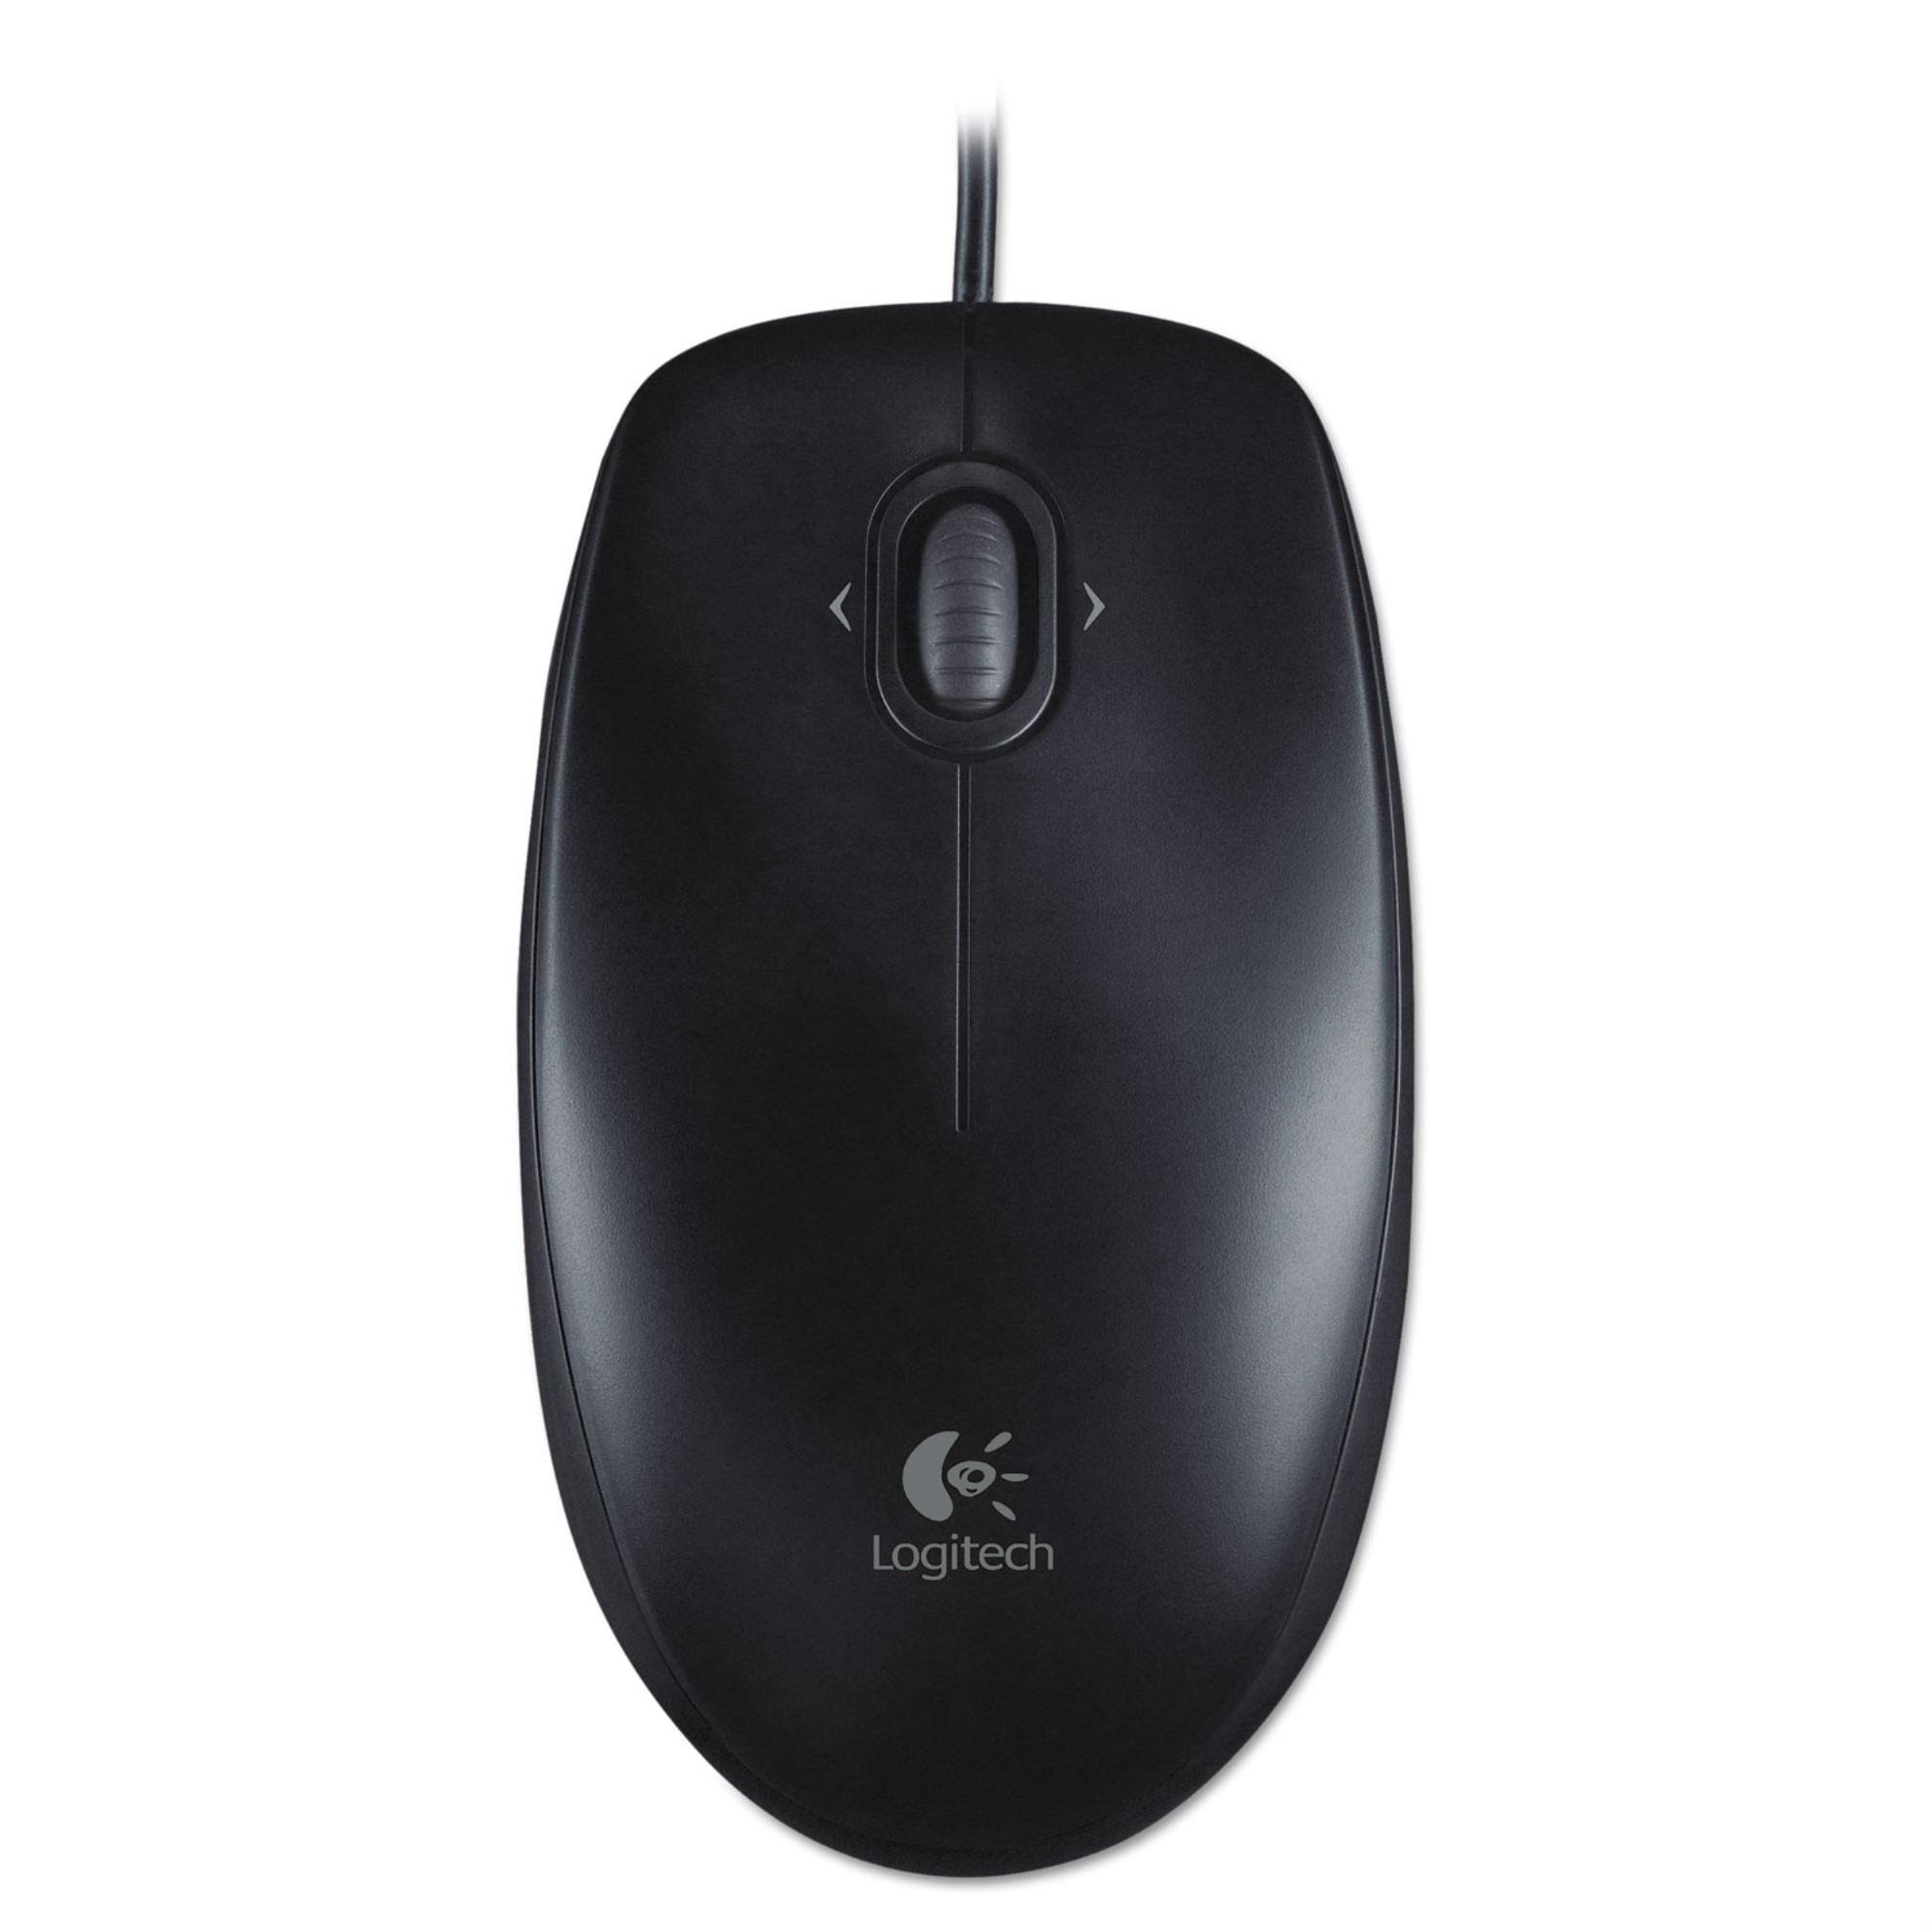 Logitech M100 Usb Optical Wired Mouse - Black